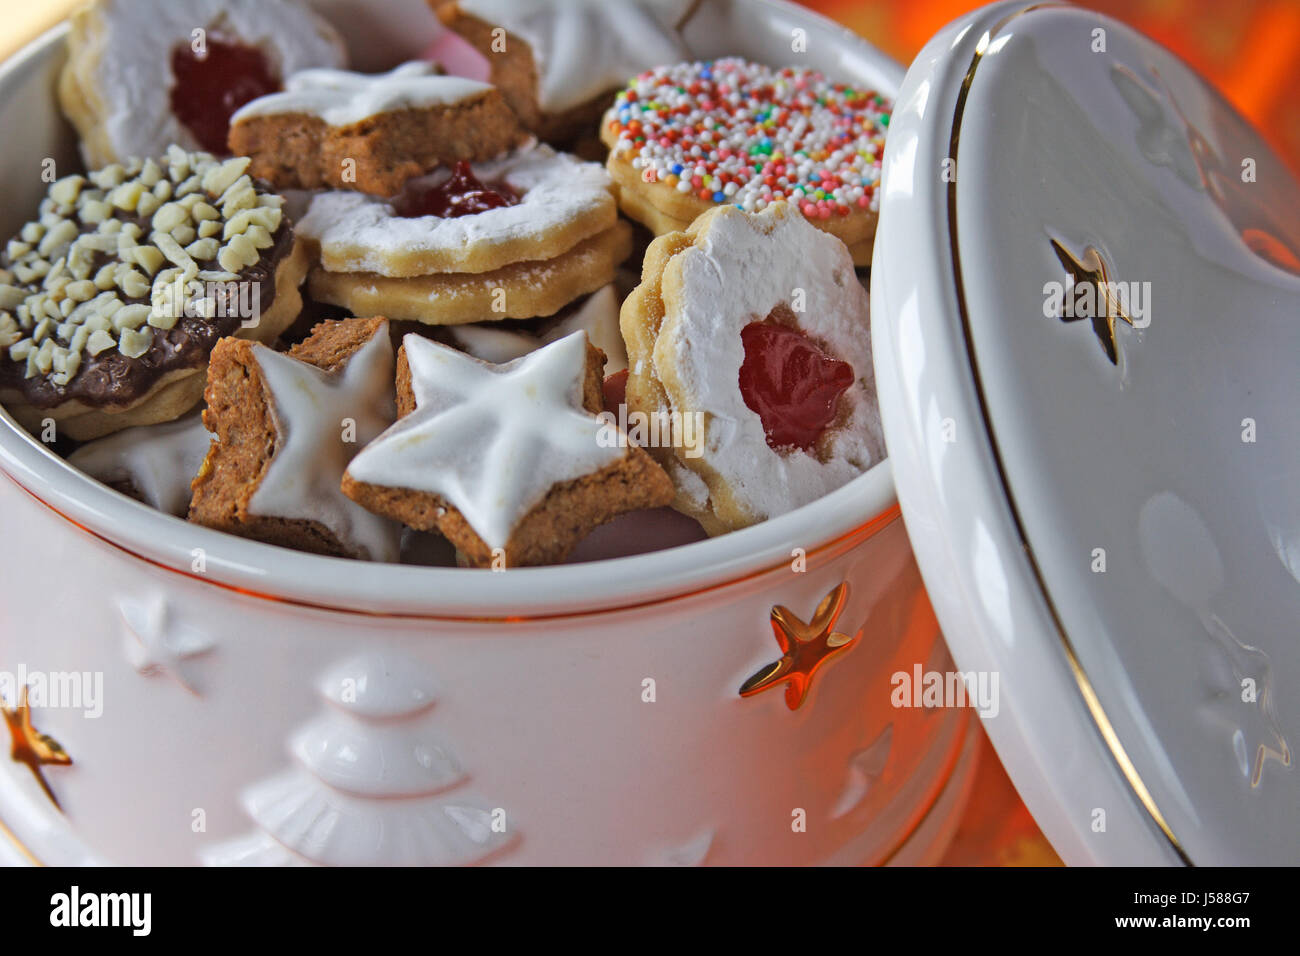 advent pastry biscuit biscuits cookies calories bake bakery bakeshop backery Stock Photo